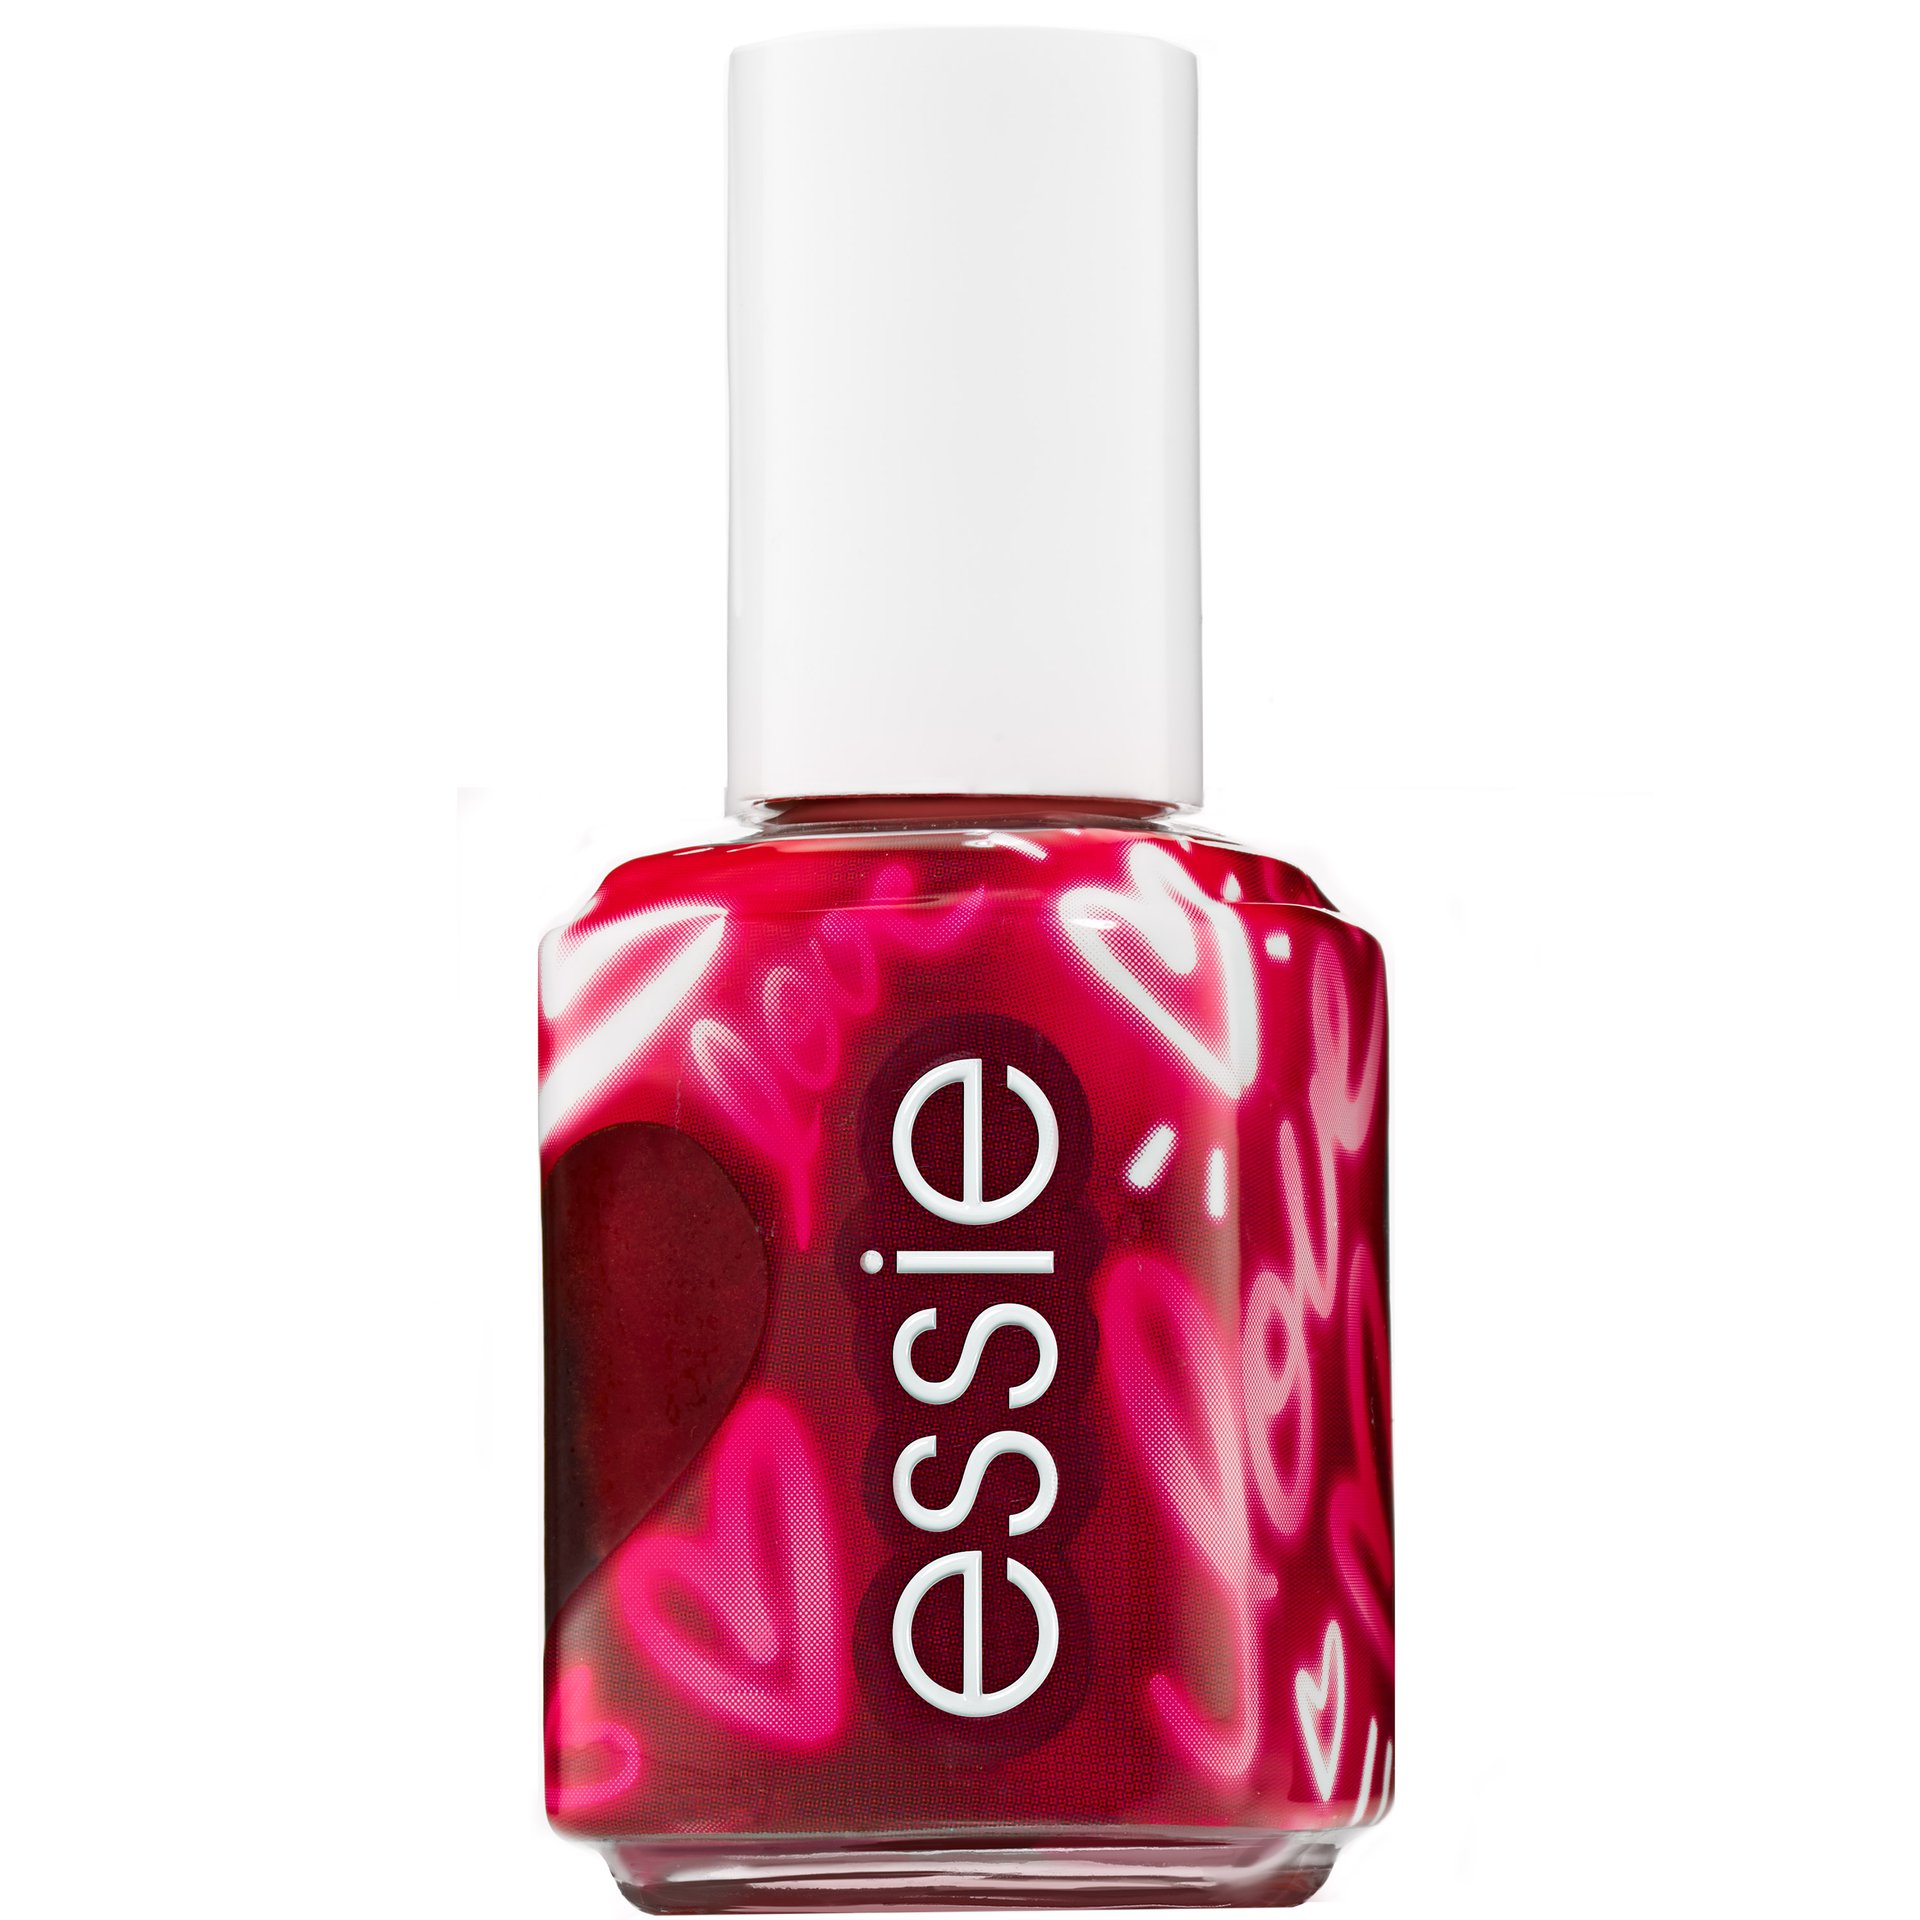 #essielove - Scarlet Red Pearly Nail Polish - essie